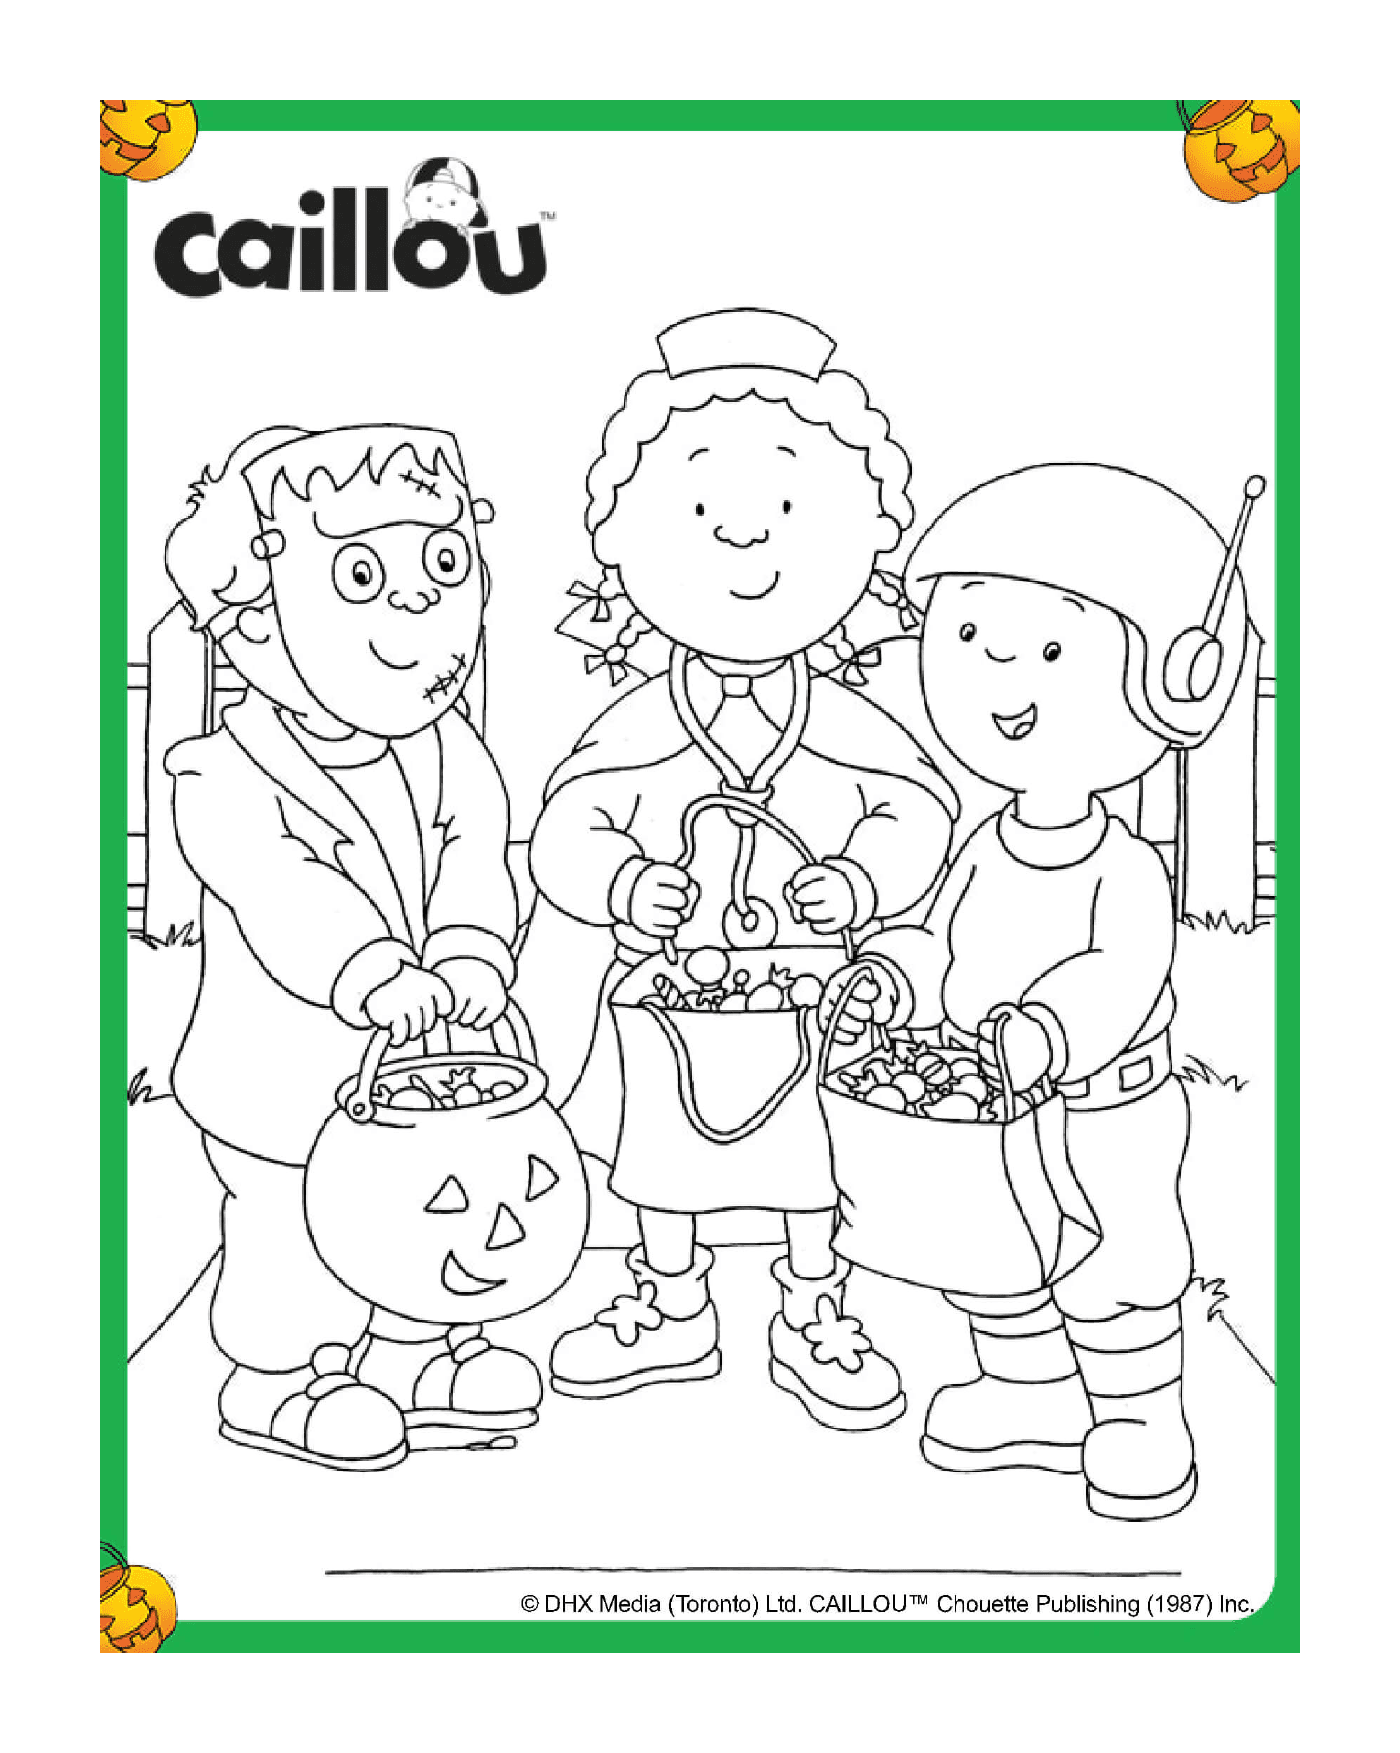  Halloween costumes with Caillou, Leo and Clementine 